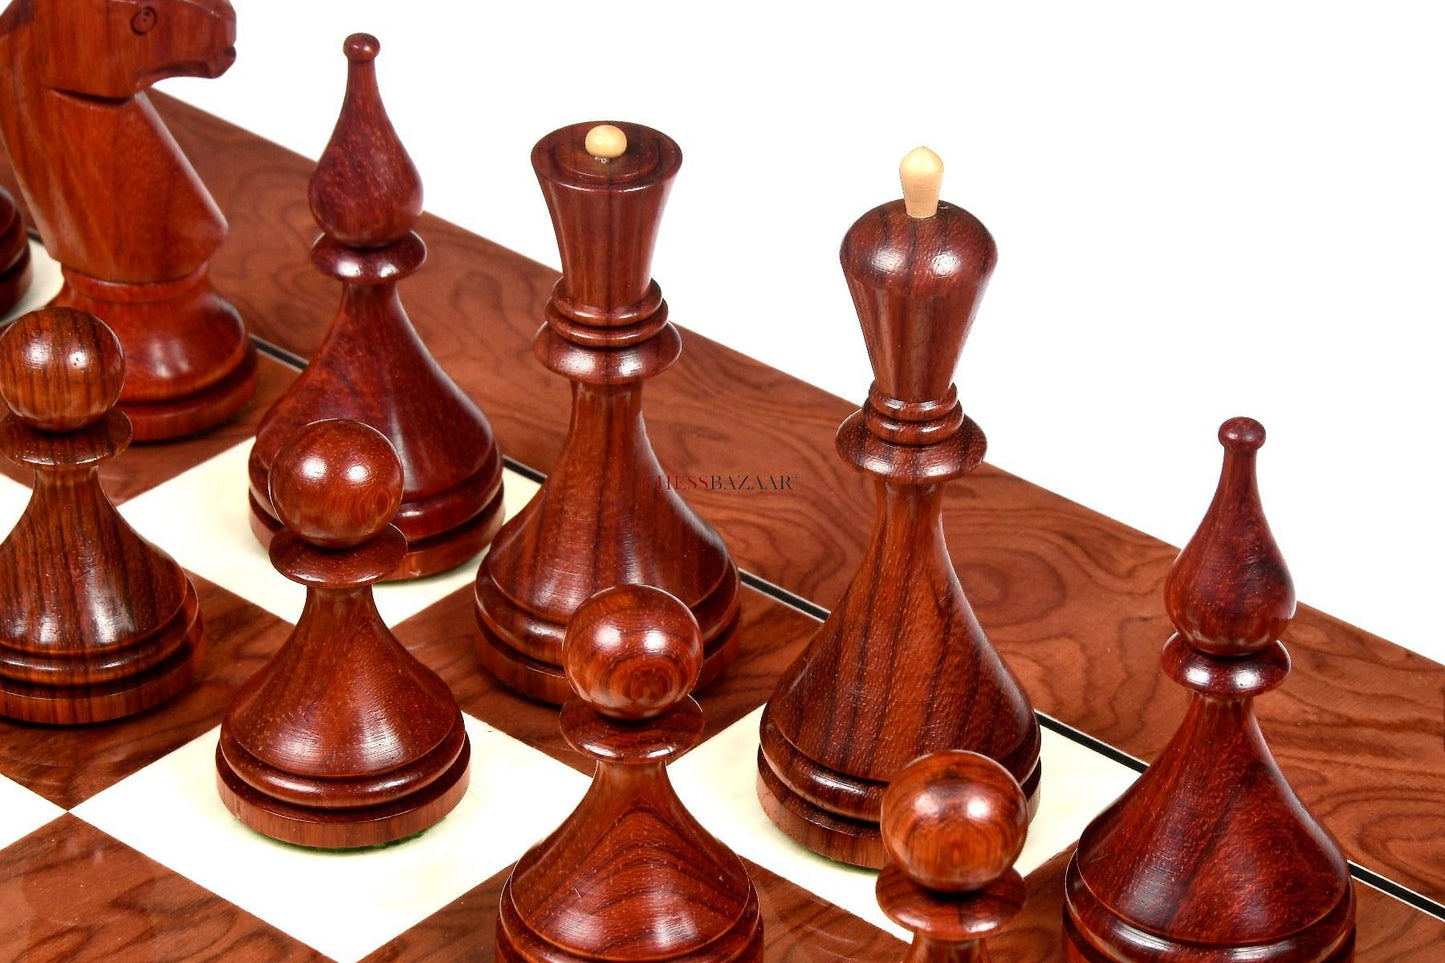 Reproduced 1961 Soviet Championship Baku Chess Pieces in Bud Rosewood & Boxwood - 4” King